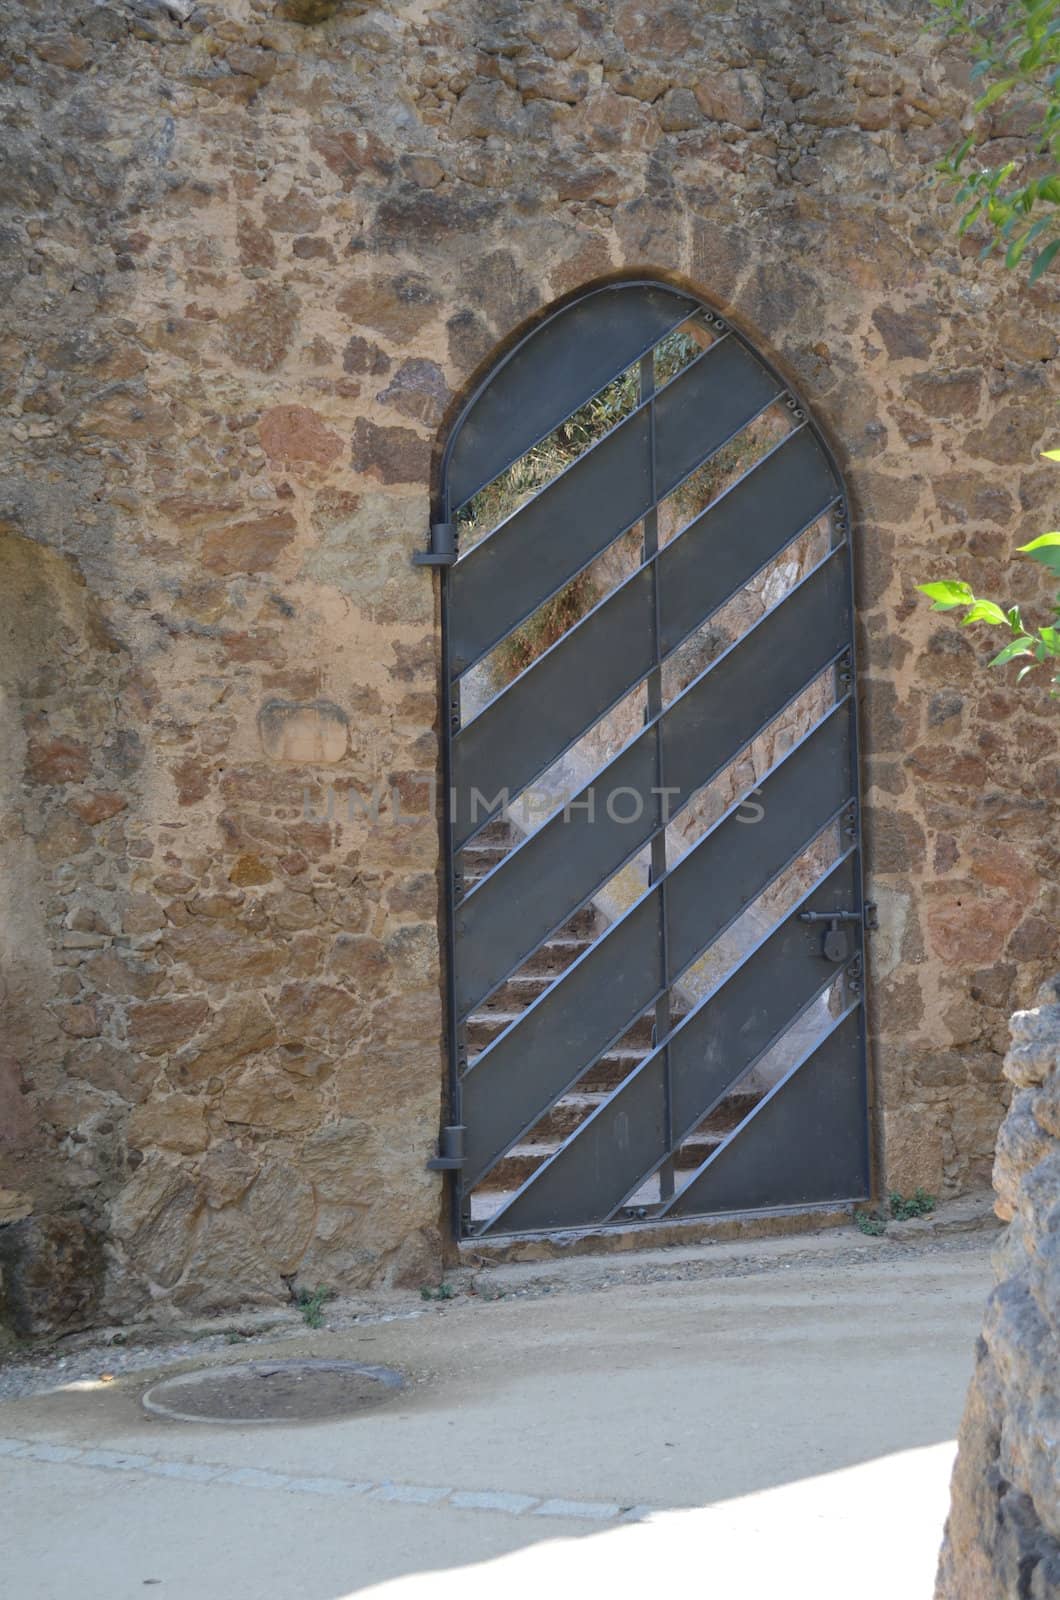 Wooden slated arched door in a exterior setting.